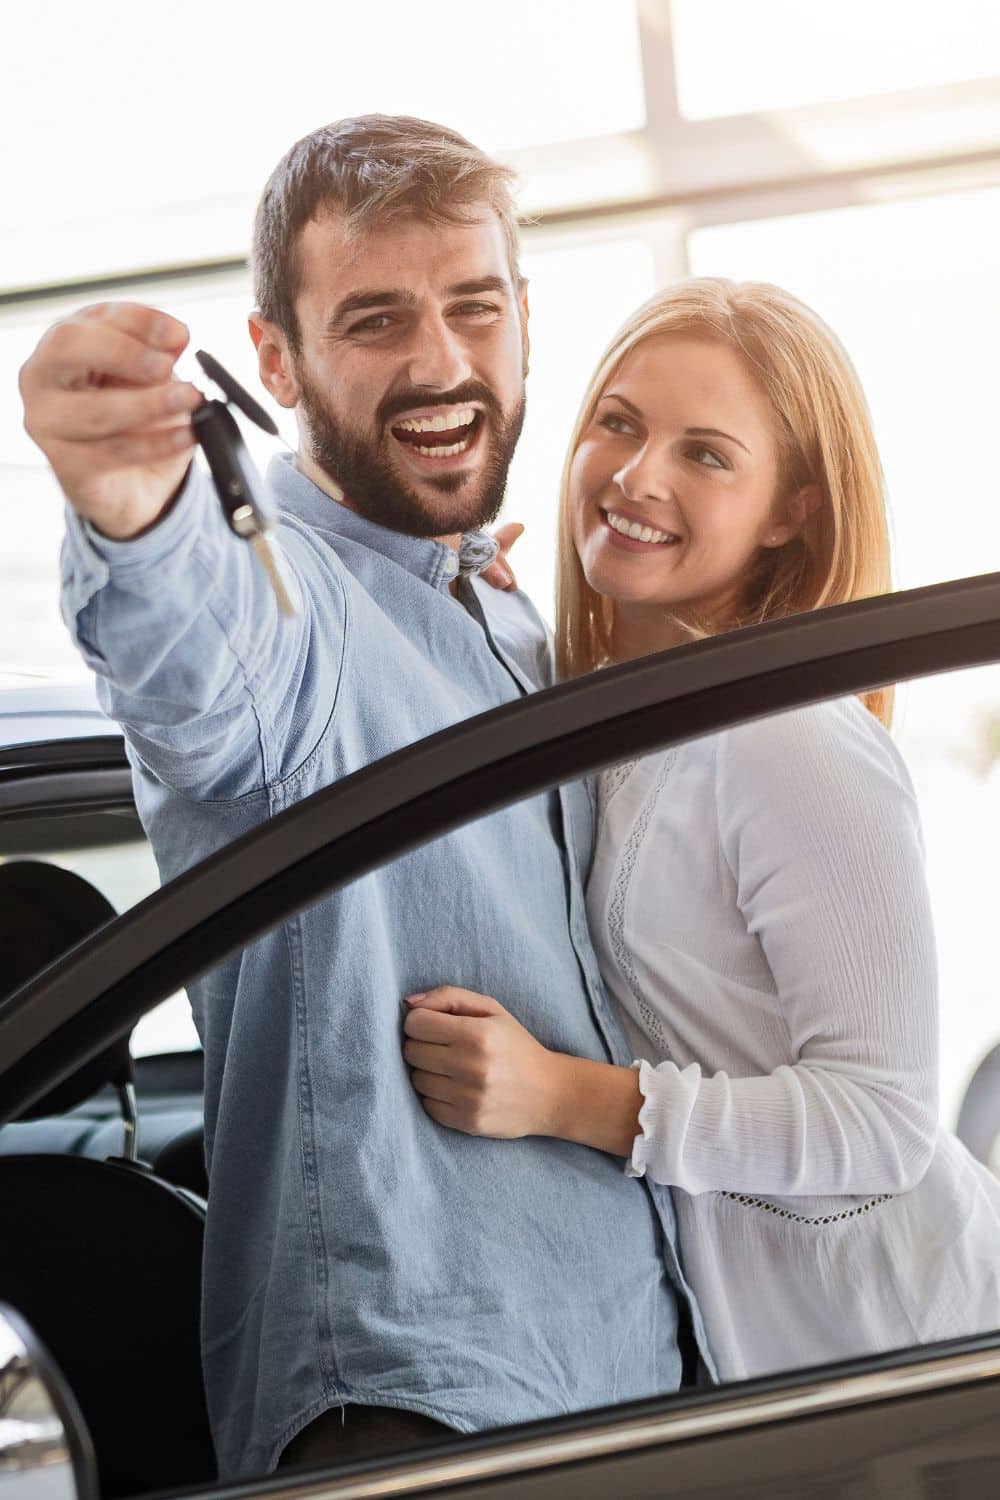 Consider These Factors When Making A Family Car Purchase